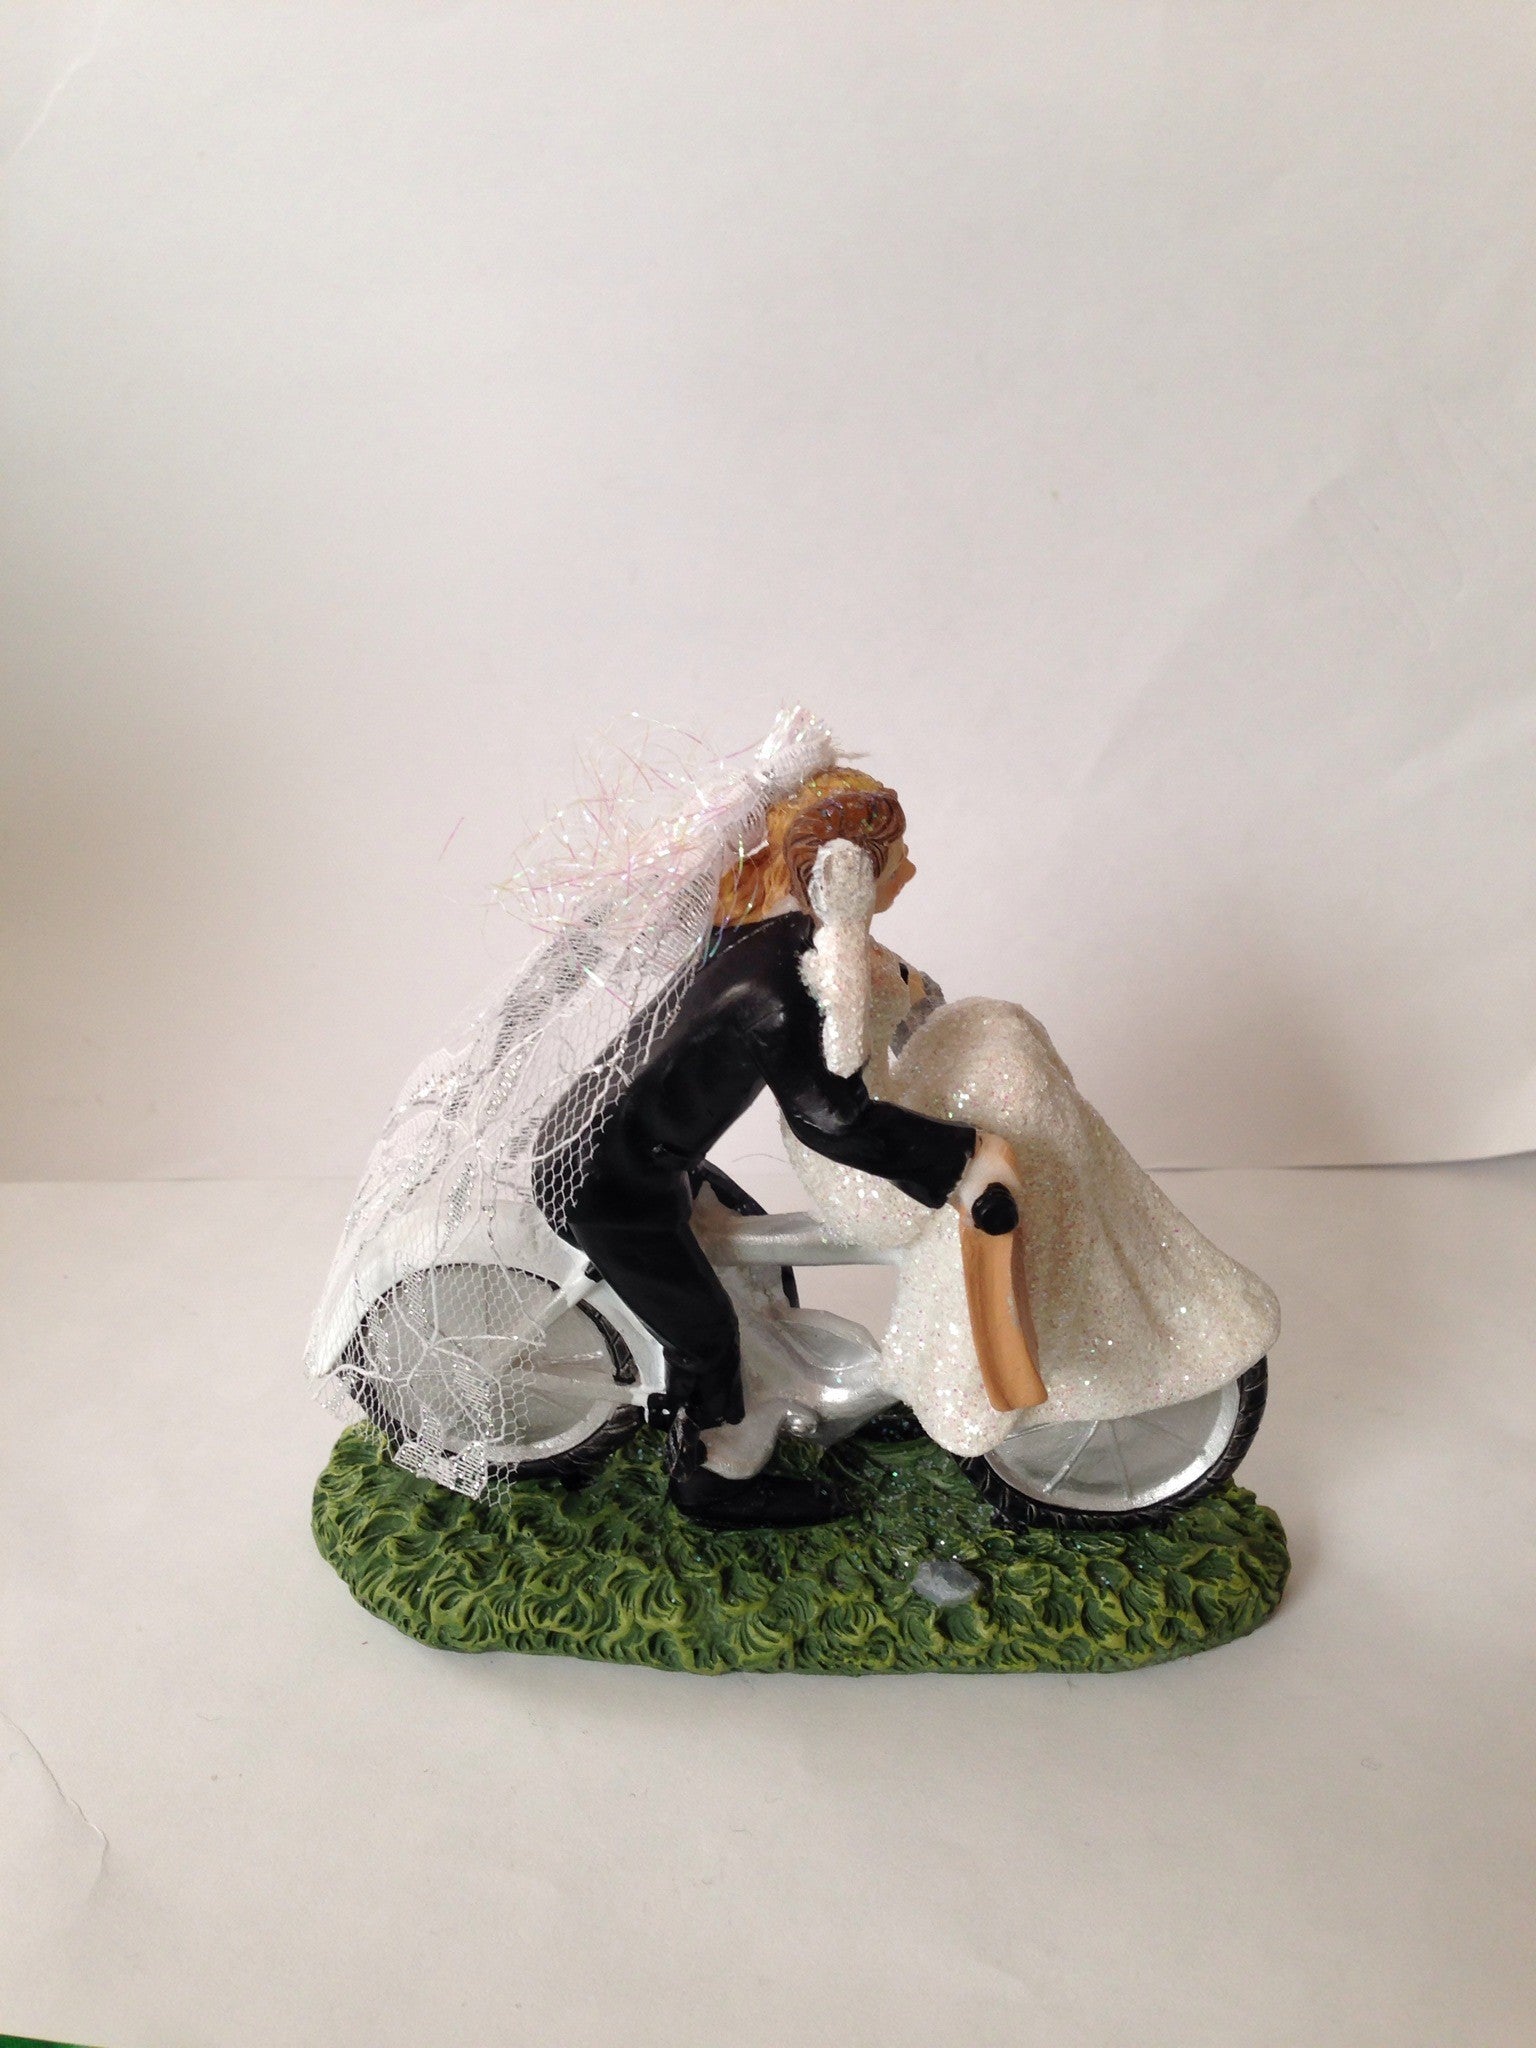 Bride And Groom Side By Side Cake Topper 